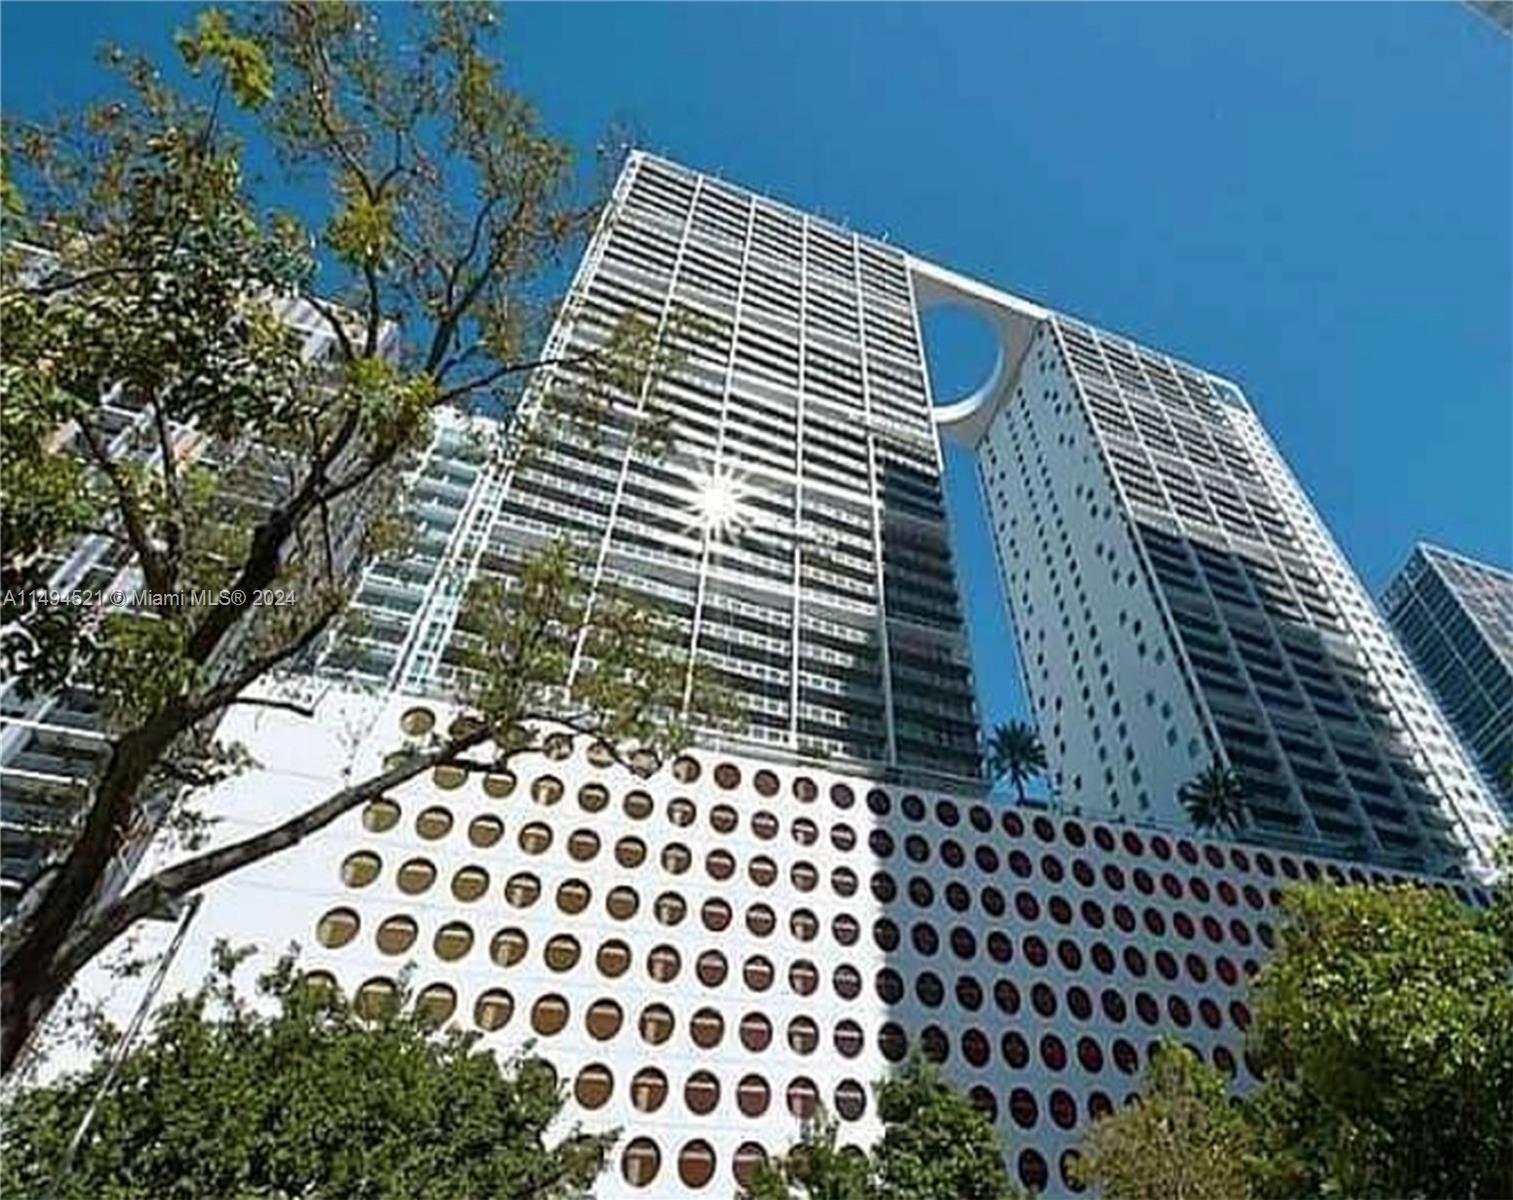 LOCATION!! BEAUTIFUL 1B/1B UNIT IN EXCLUSIVE 500 BRICKELL WEST CONDO LOCATED ON BRICKELL AVENUE.
SERVICES 24/7. VALET PARKING, CONCIERGE. EXCLUSIVE AMENITIES, SWIMMING POOL, CLUB ROOM WITH
KITCHEN, BILLIARDS AND BAY VIEWS, SPA, FITNESS CENTER, THEATER. WALKING DISTANCE TO SHOPES,
RESTAURANTS, ENTERTAINMENT, BANKS, BEAUTY AND MUCH MORE.